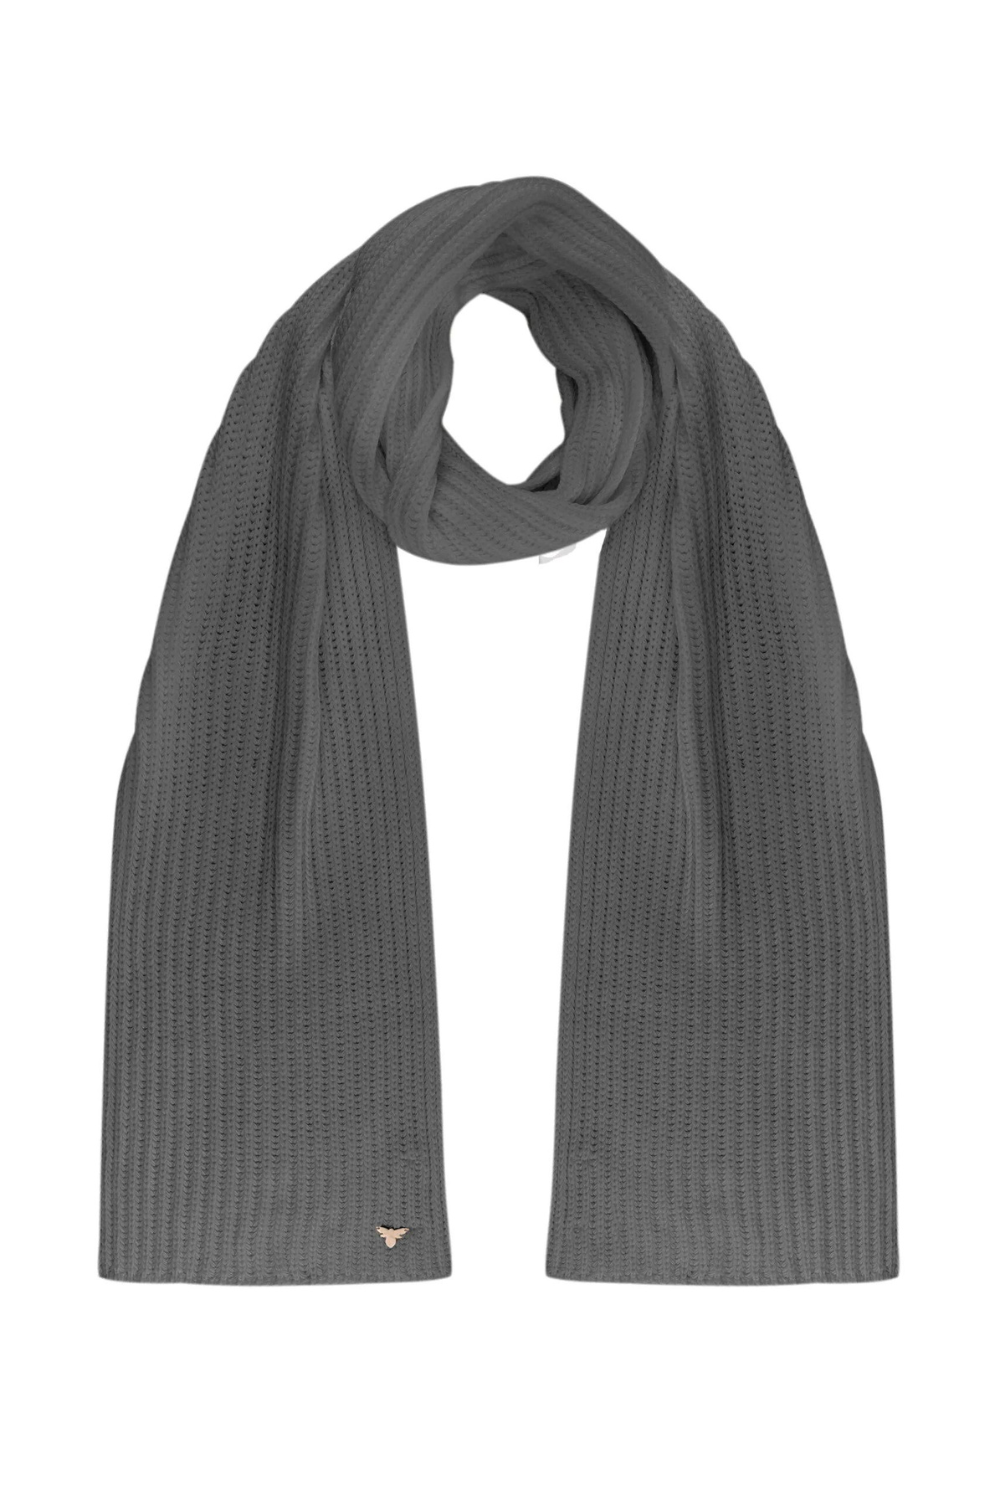 Knitted scarf light gray (T.Mosca) ScarfMR23-01